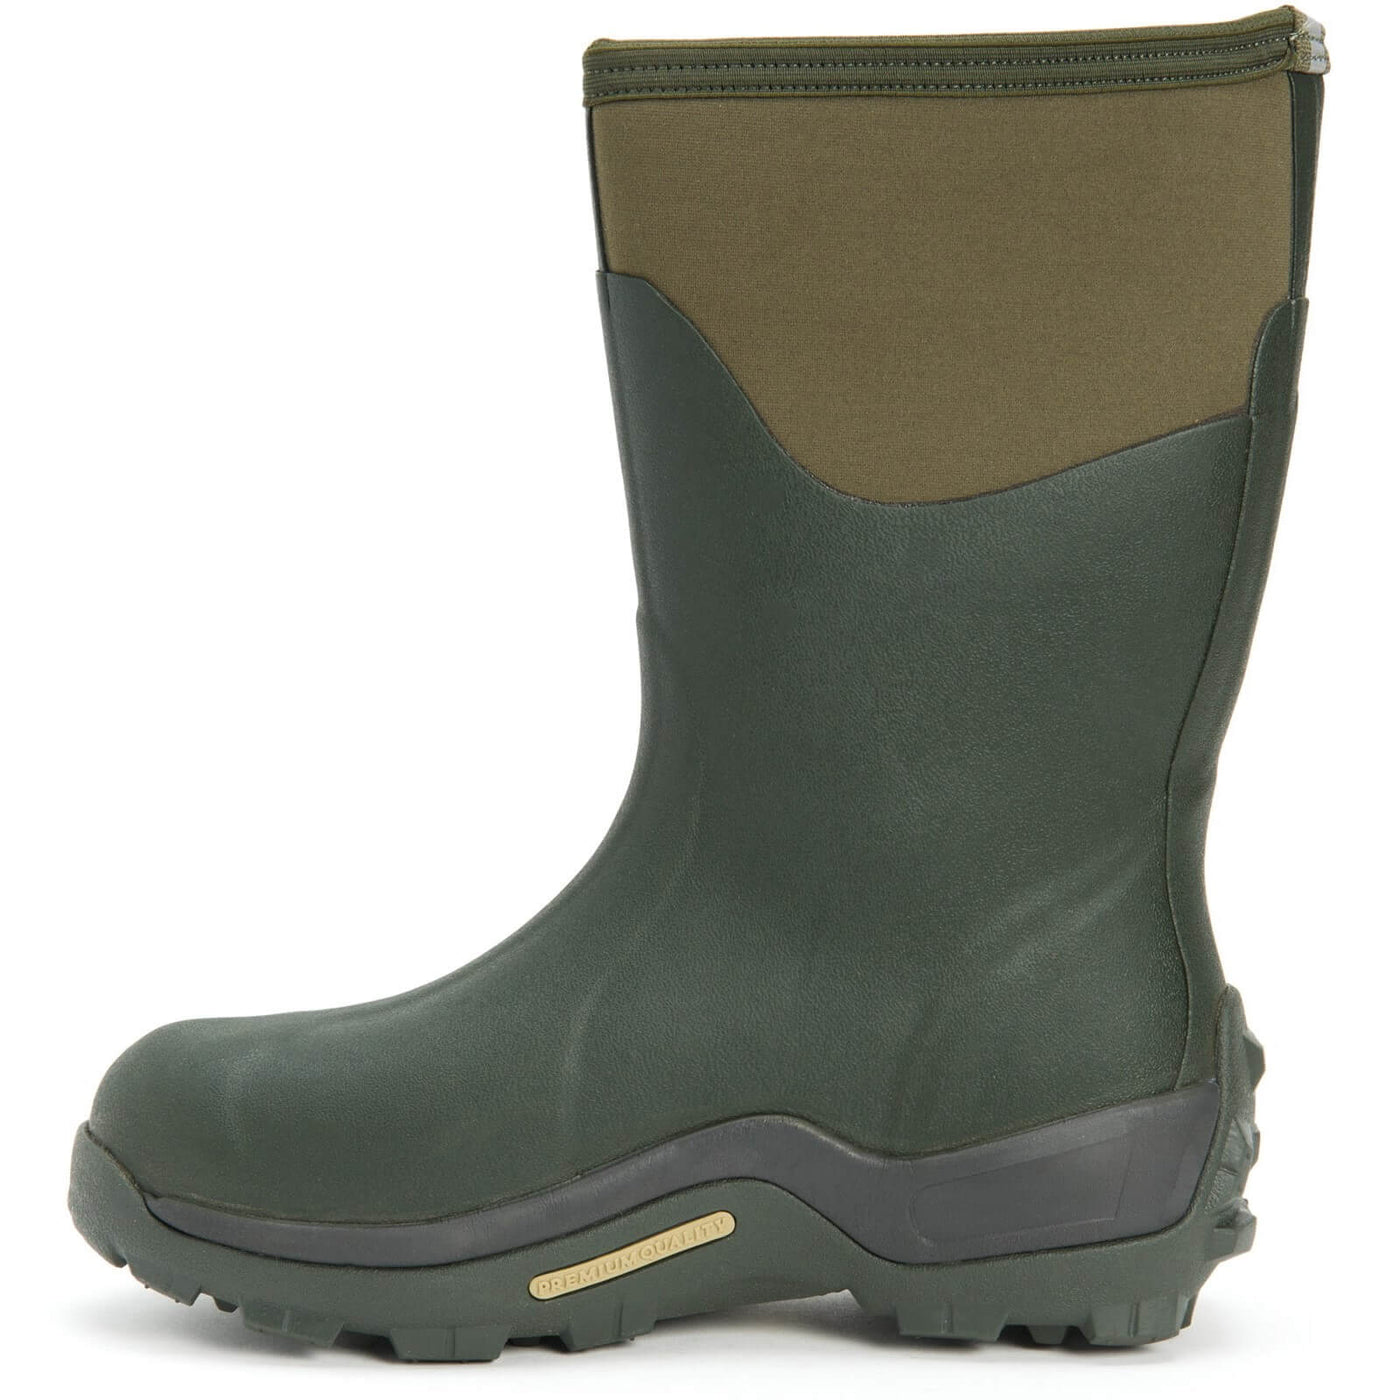 Muck Boots Muckmaster Mid Wellington boots Moss 7#colour_moss-army-green